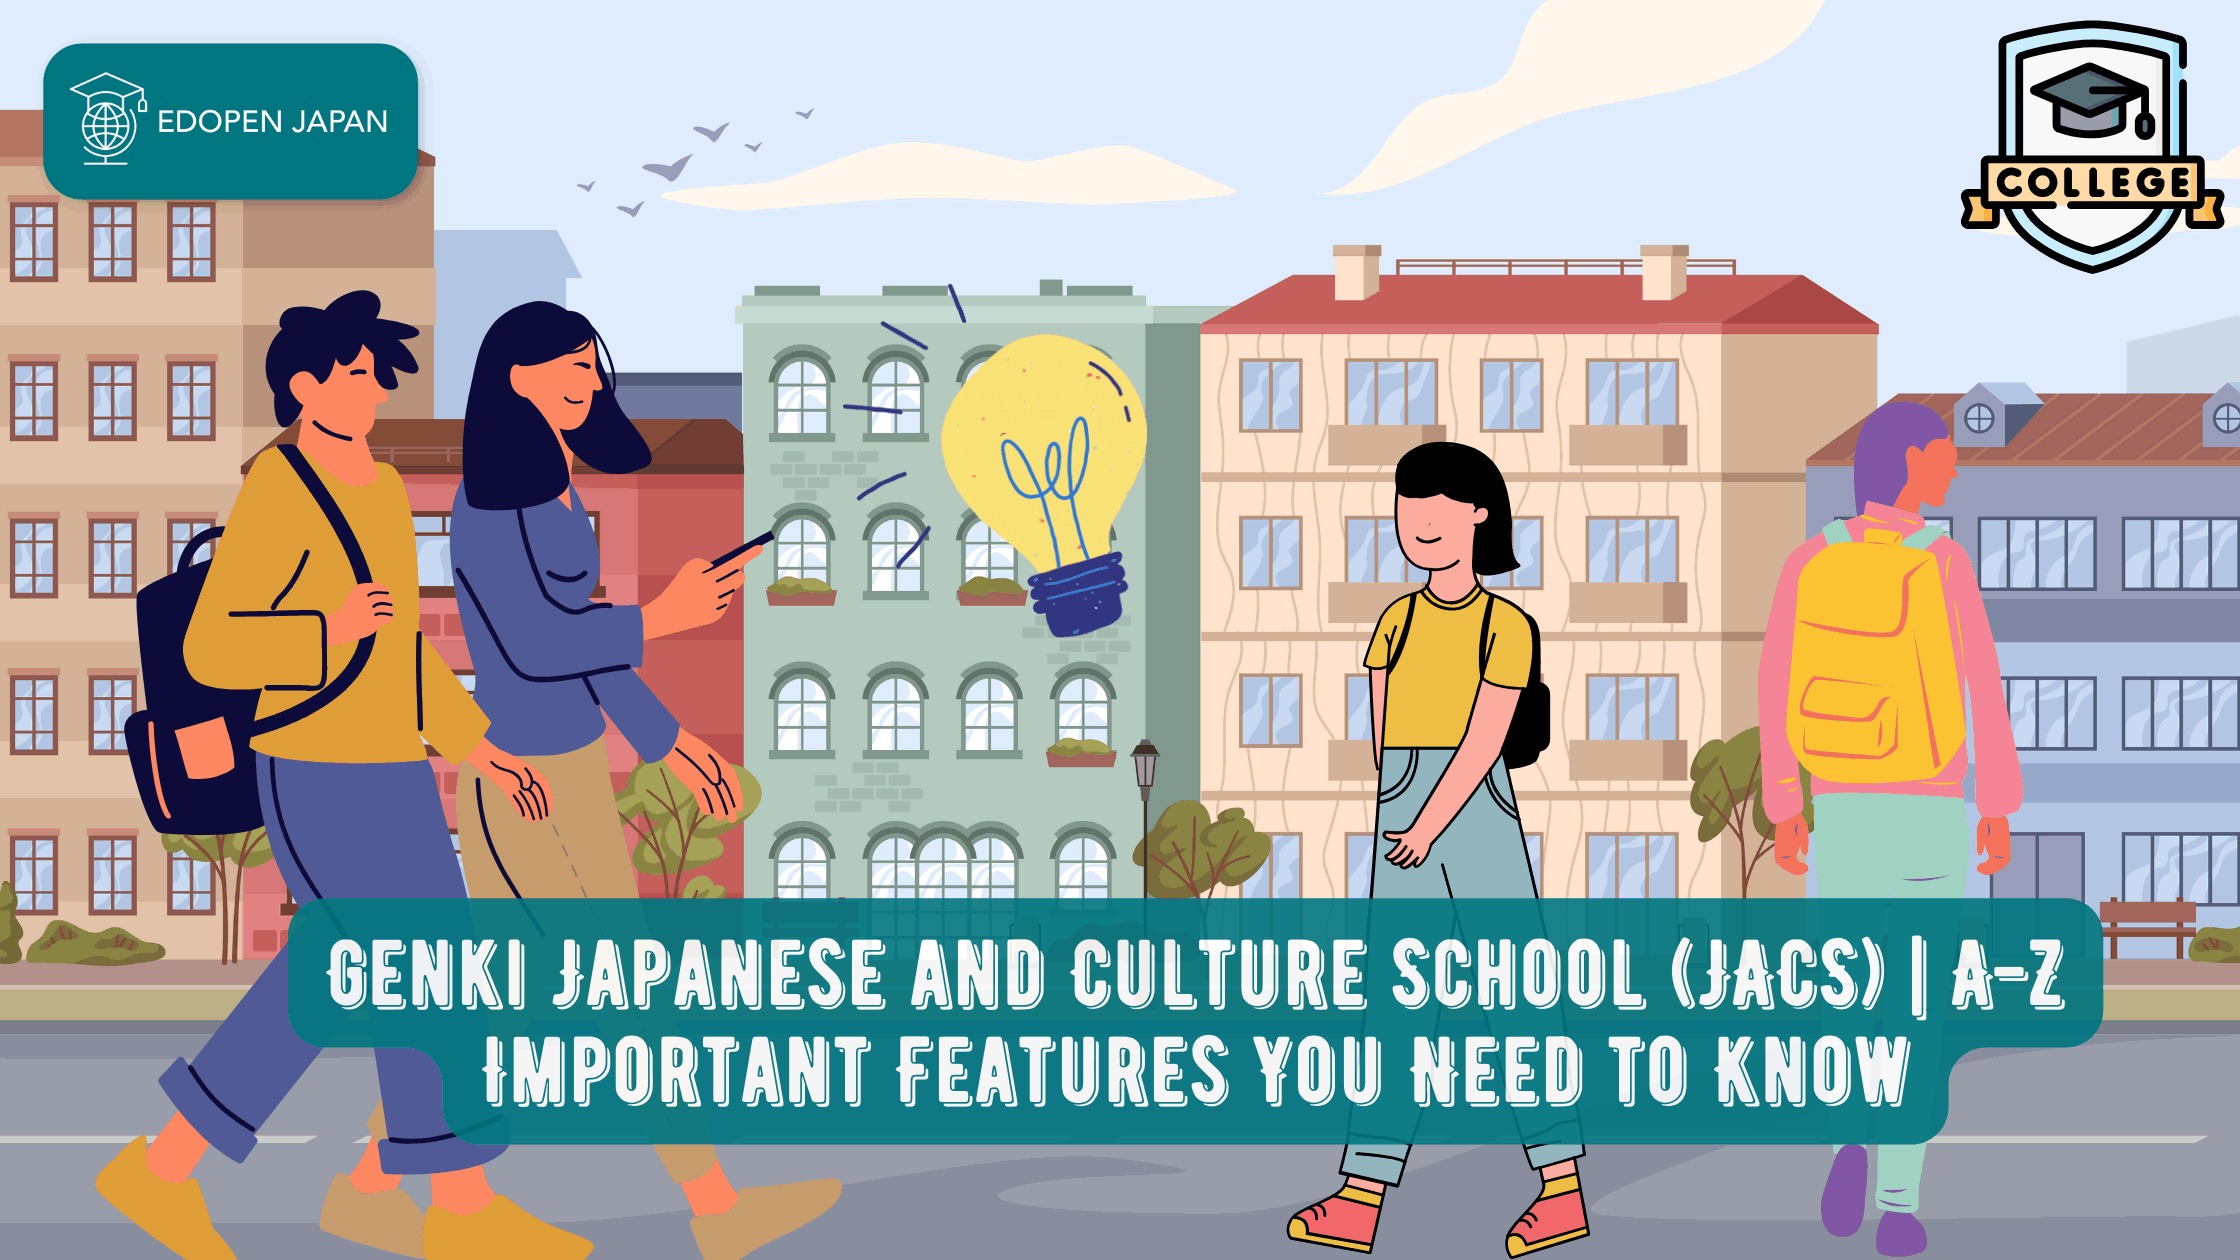 Genki Japanese and Culture School (JACS) | A-Z Important Features You Need to Know - EDOPEN Japan